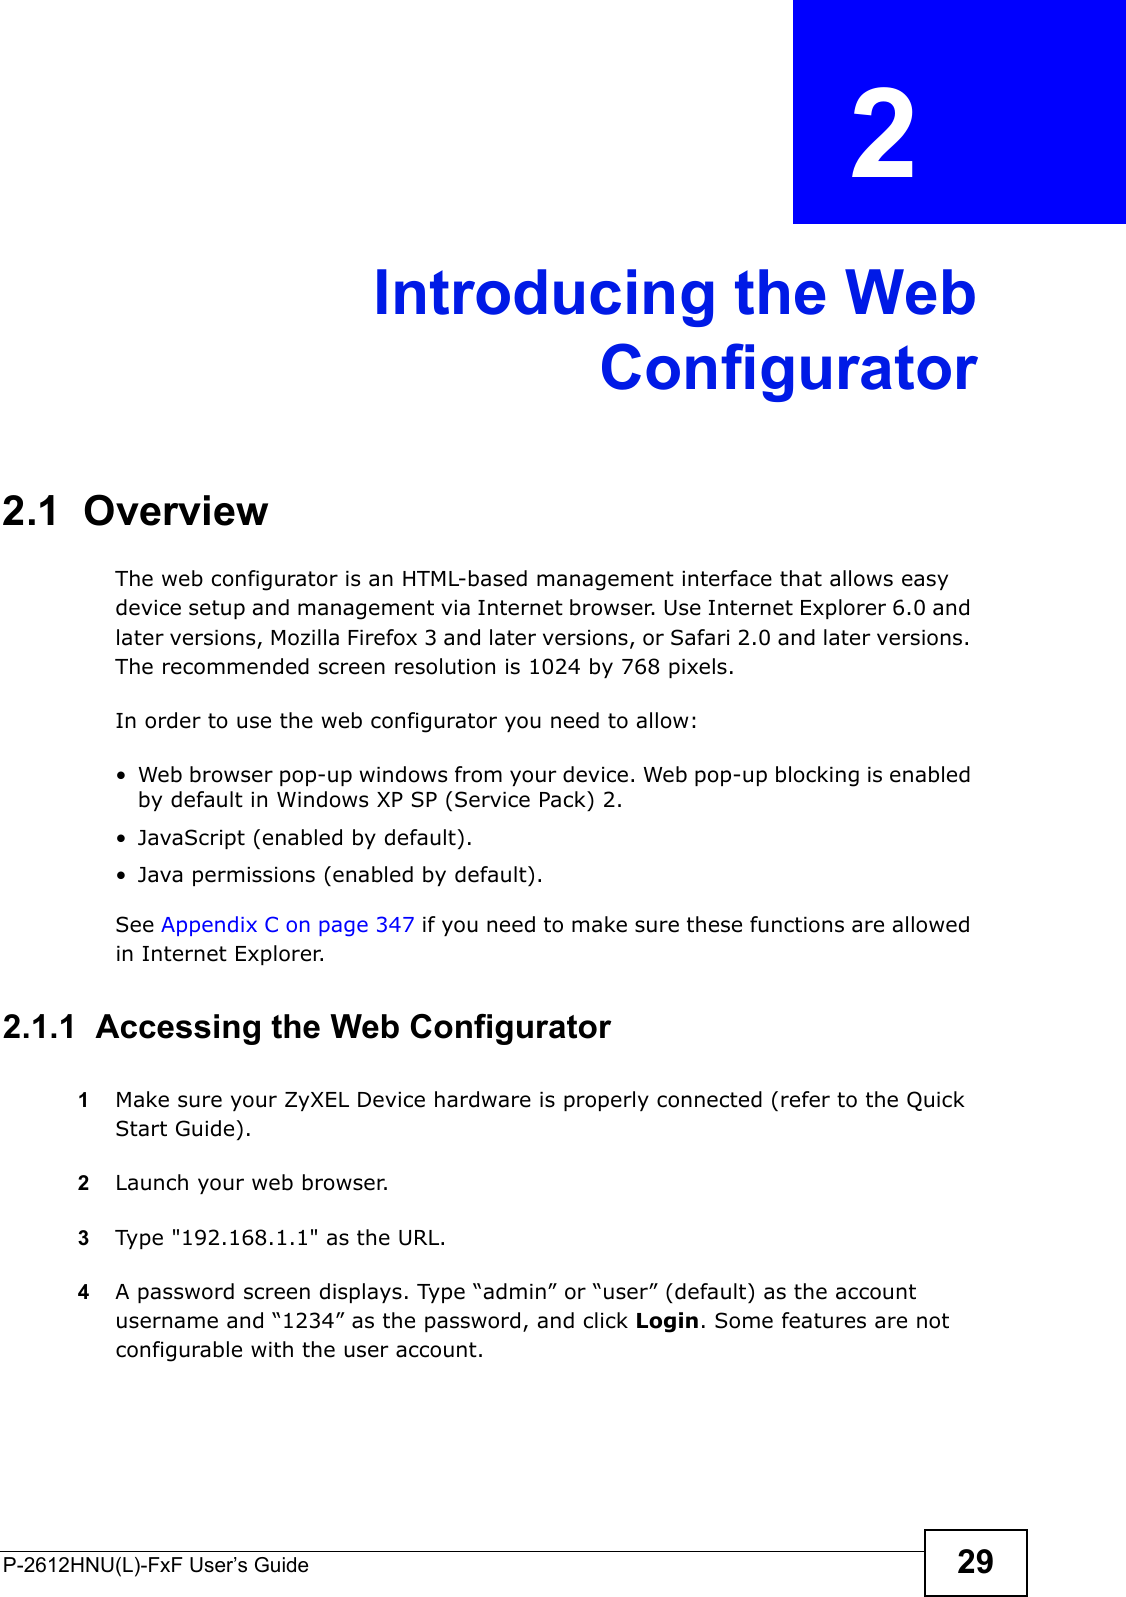 P-2612HNU(L)-FxF User’s Guide 29CHAPTER   2 Introducing the WebConfigurator2.1  OverviewThe web configurator is an HTML-based management interface that allows easy device setup and management via Internet browser. Use Internet Explorer 6.0 and later versions, Mozilla Firefox 3 and later versions, or Safari 2.0 and later versions. The recommended screen resolution is 1024 by 768 pixels.In order to use the web configurator you need to allow:• Web browser pop-up windows from your device. Web pop-up blocking is enabled by default in Windows XP SP (Service Pack) 2.• JavaScript (enabled by default).• Java permissions (enabled by default).See Appendix C on page 347 if you need to make sure these functions are allowed in Internet Explorer.2.1.1  Accessing the Web Configurator1Make sure your ZyXEL Device hardware is properly connected (refer to the Quick Start Guide).2Launch your web browser.3Type &quot;192.168.1.1&quot; as the URL.4A password screen displays. Type “admin” or “user” (default) as the accountusername and “1234” as the password, and click Login. Some features are notconfigurable with the user account. 